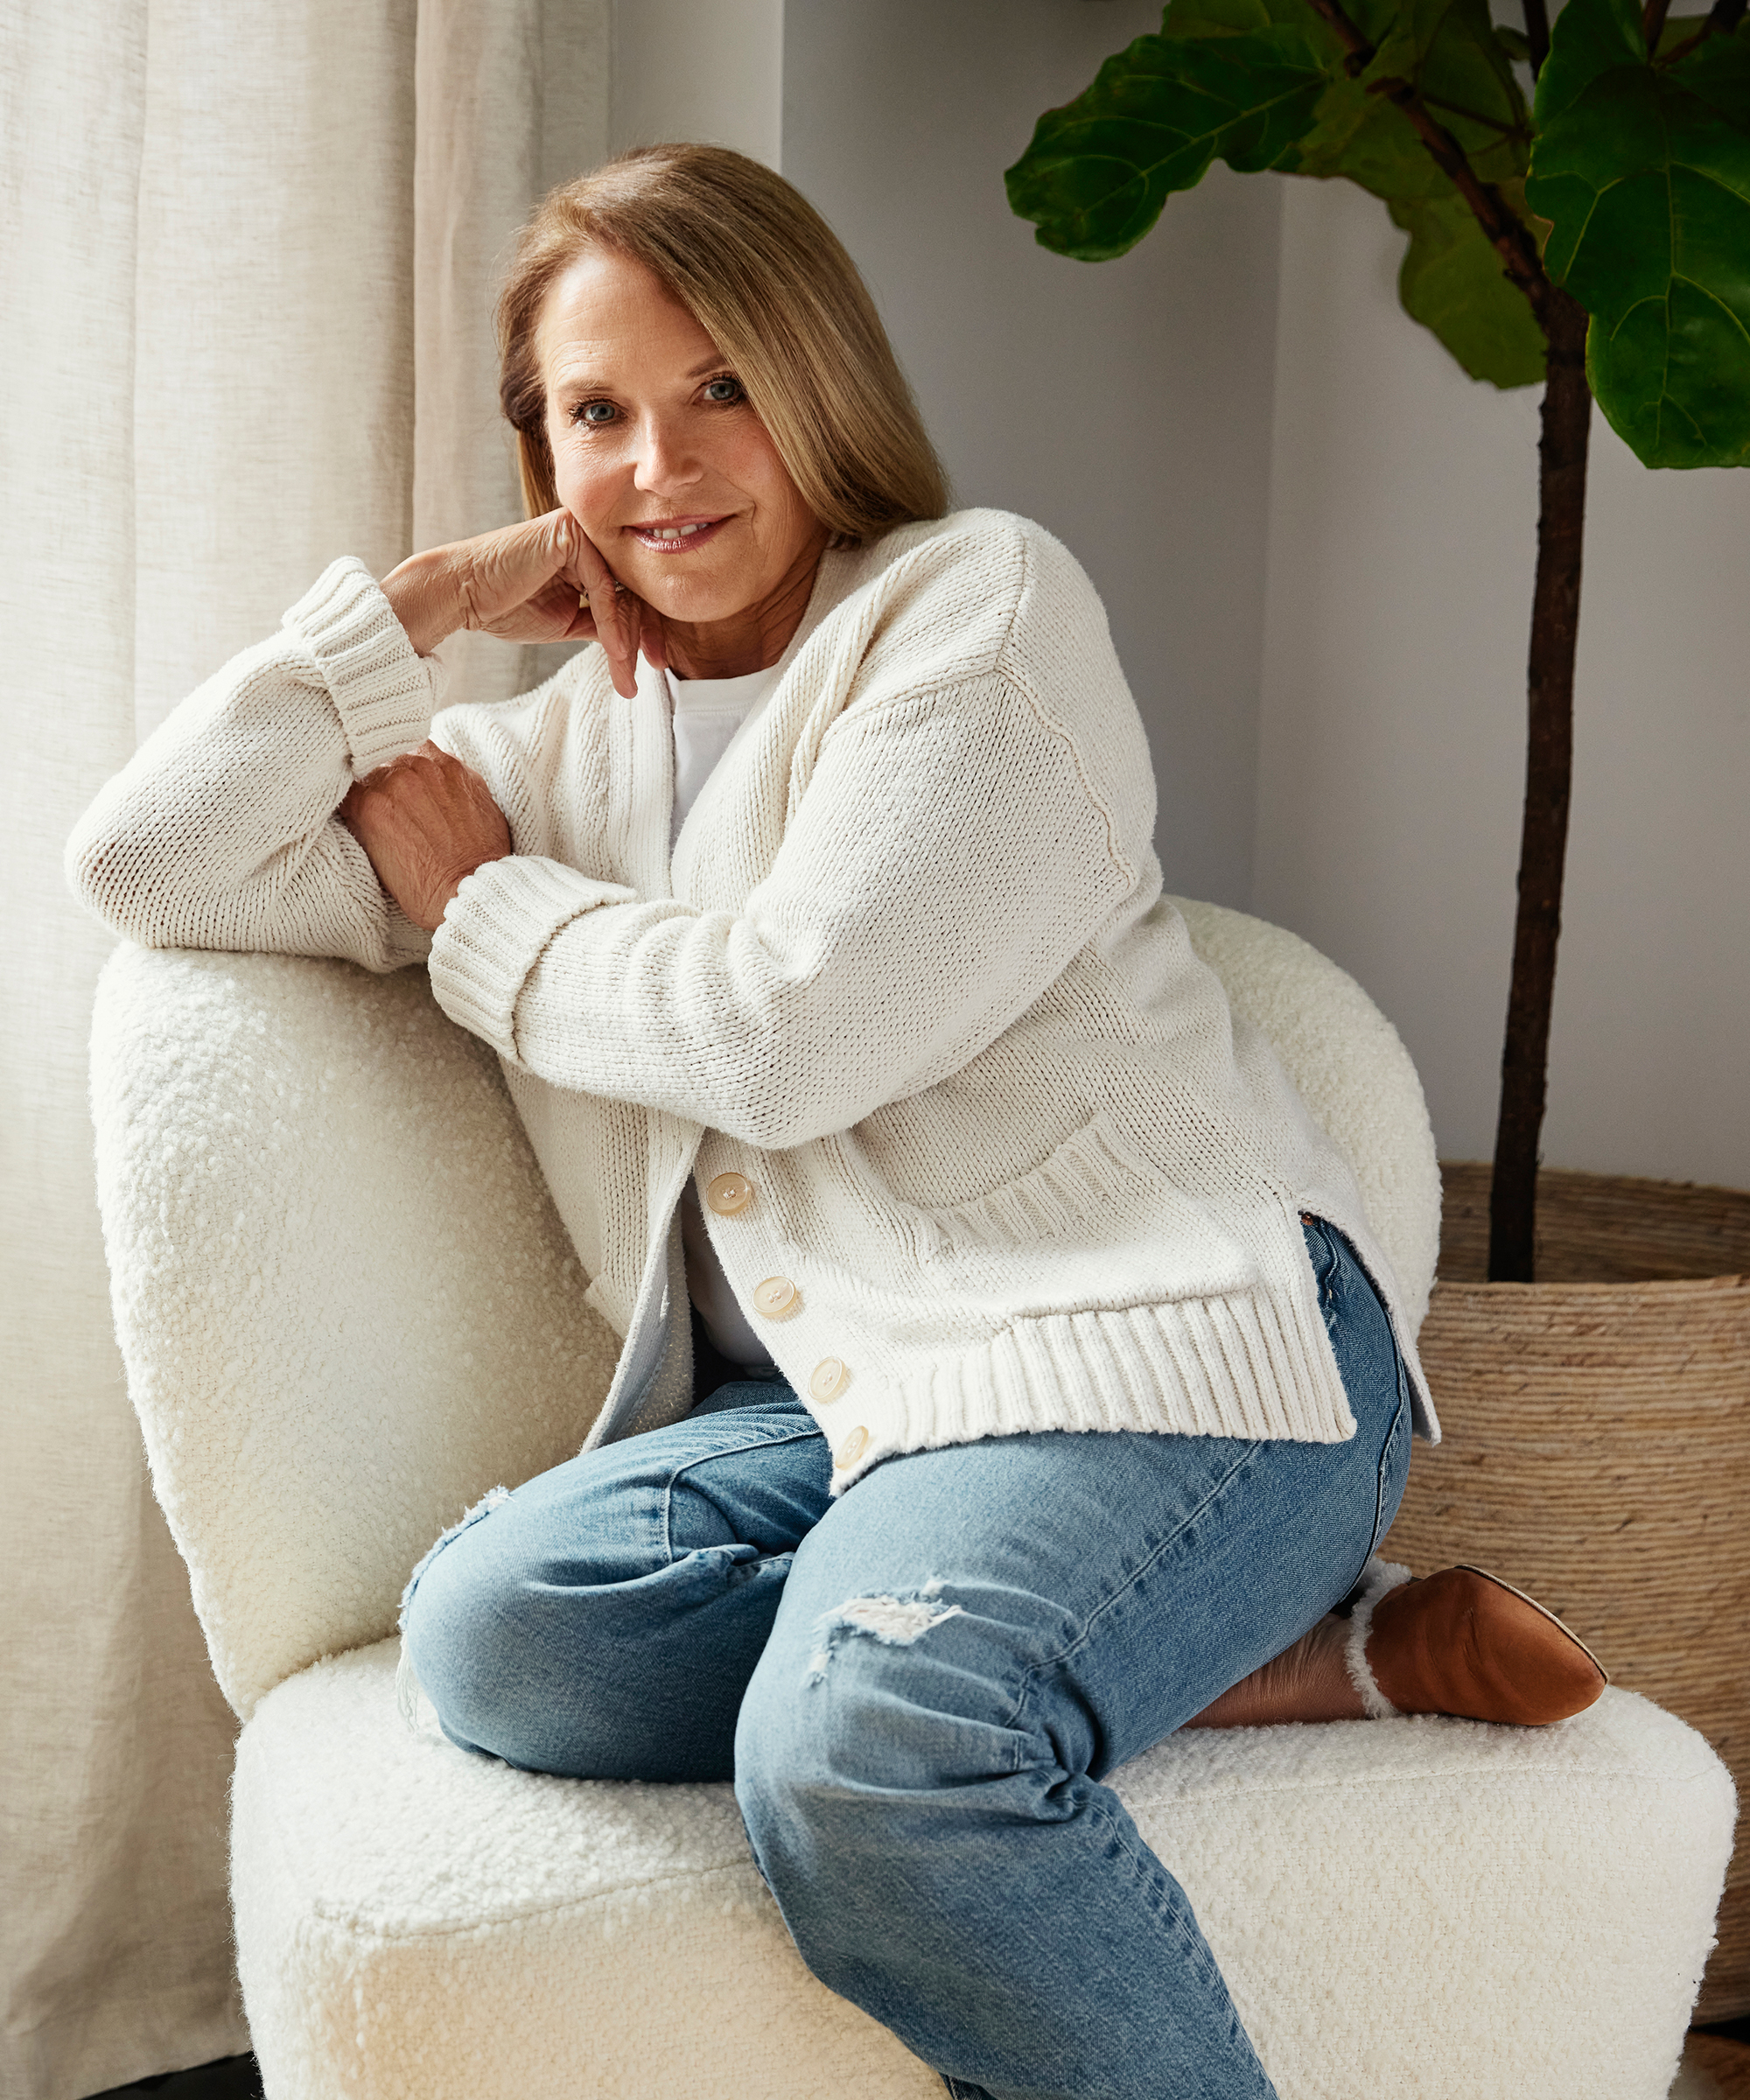 Katie Couric Net Worth - A Story Of Influence And Inspiration